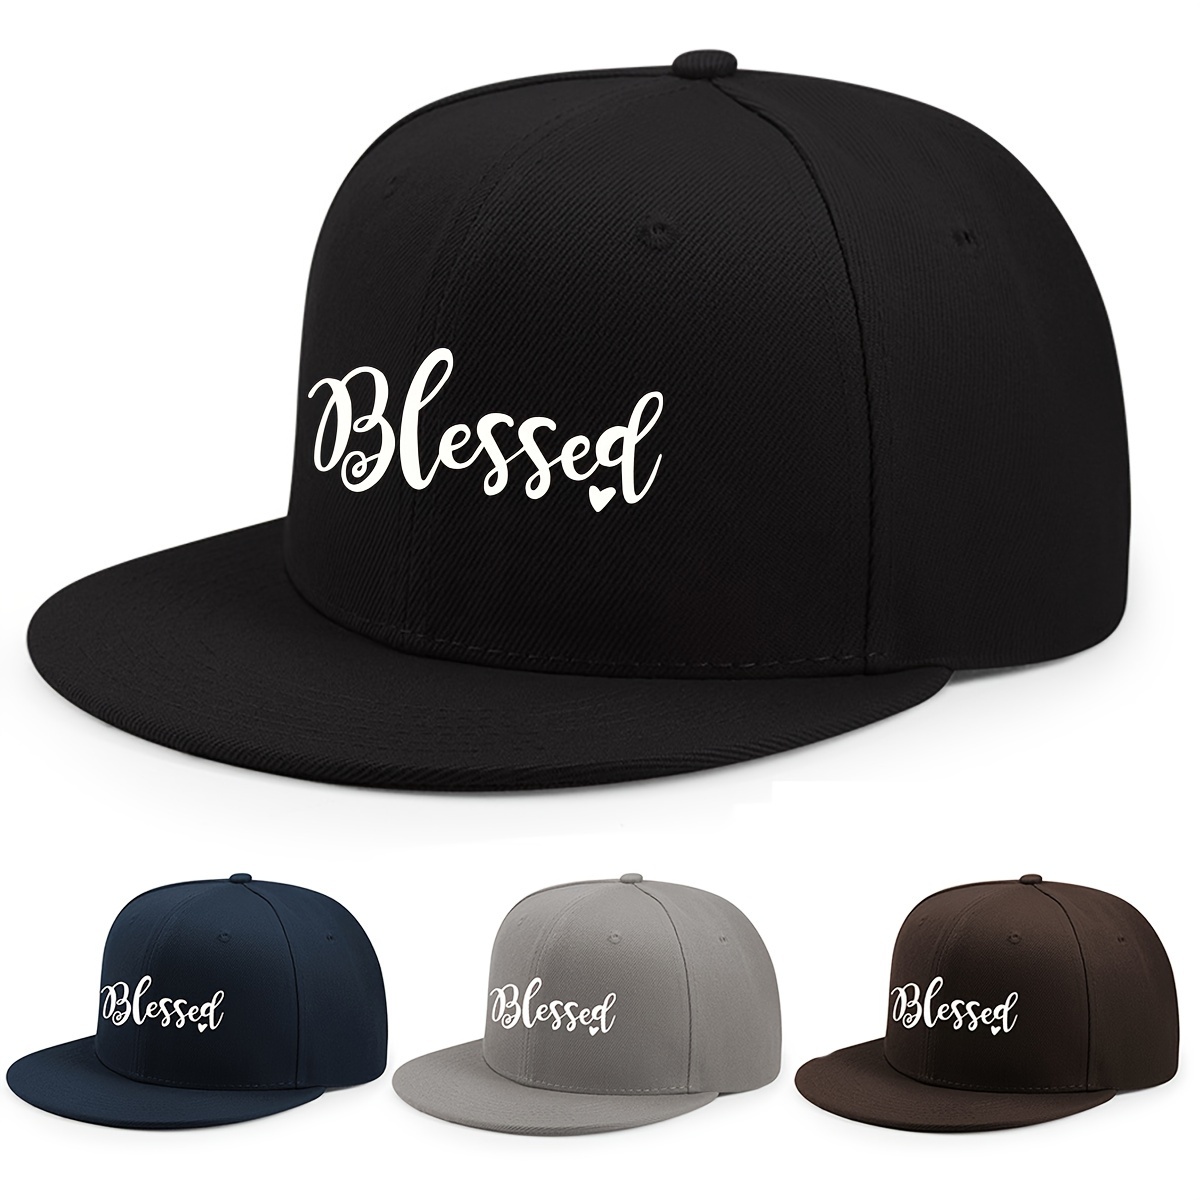 

Unisex "blessed" Print Baseball Cap, Sun Protection Snapback Hat, Casual Street Wear, Outdoor Headwear For Adjustable Fit